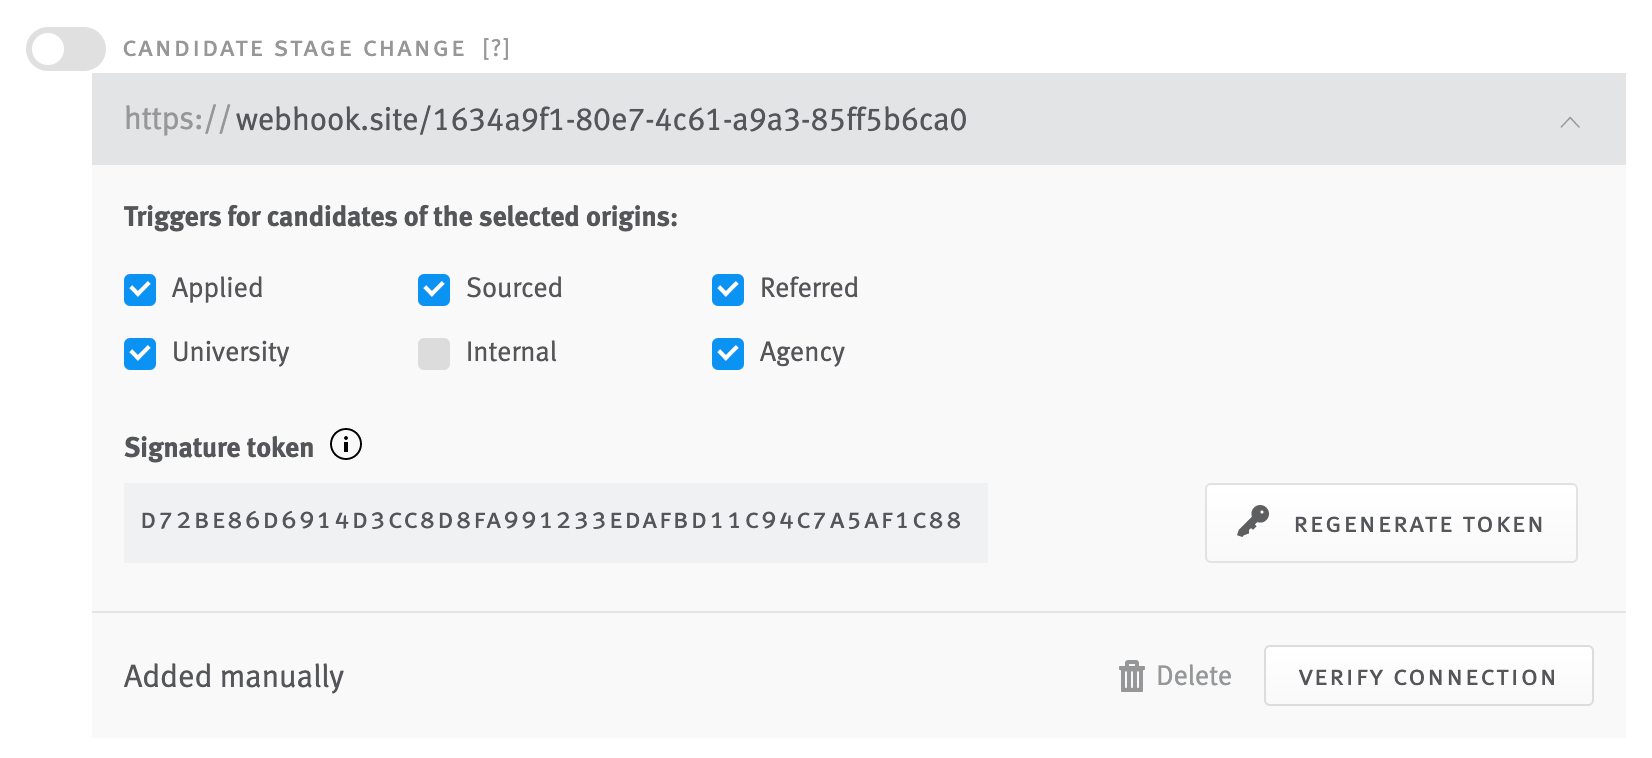 Candidate stage change webhook fields expanded; URL field is populated with webhook URL and event toggle is inactive